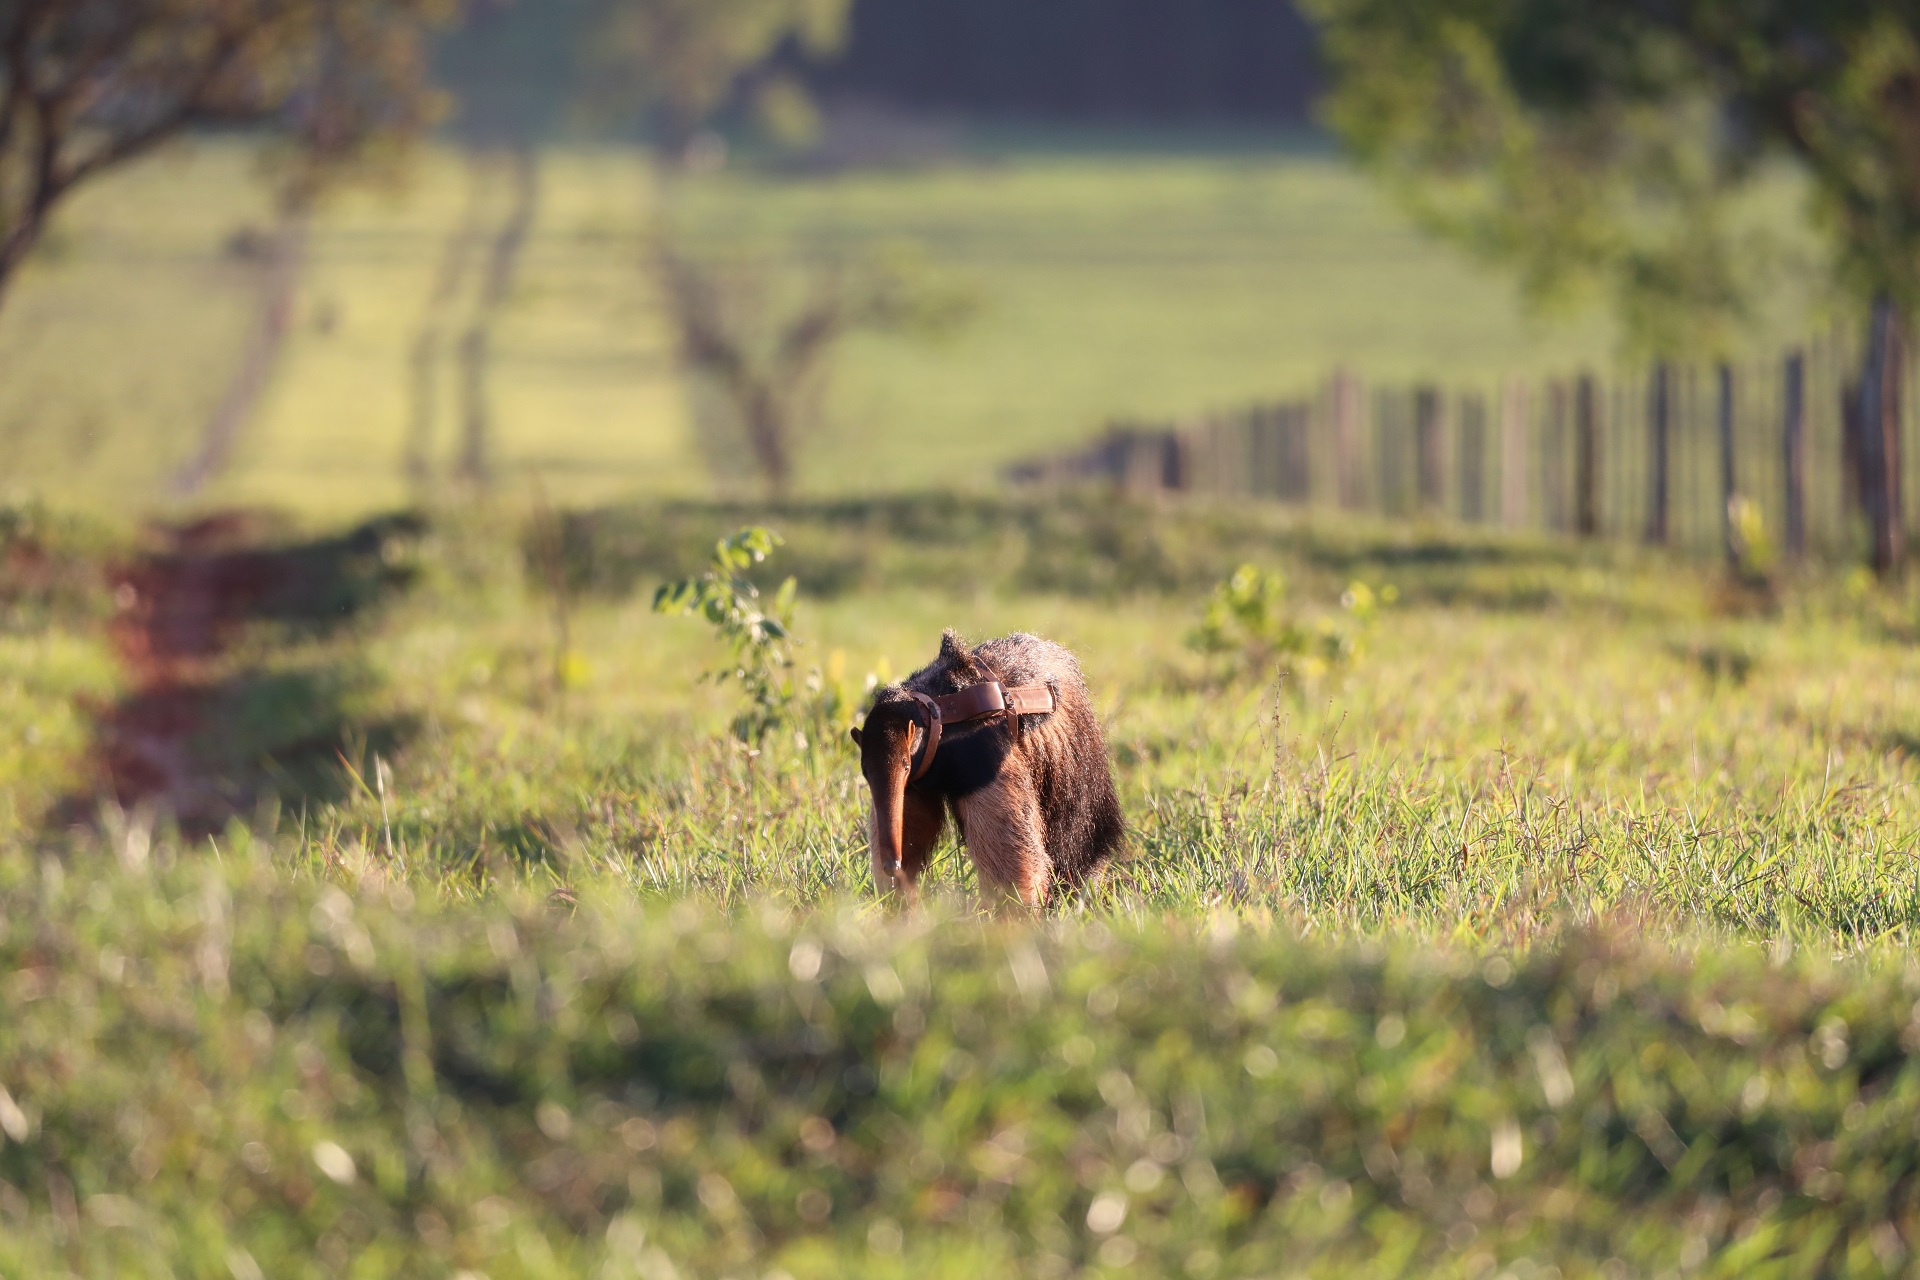 Giant Anteater with a collar in the setting sun in Cerrado Brazil Image: JESS WISE 2022